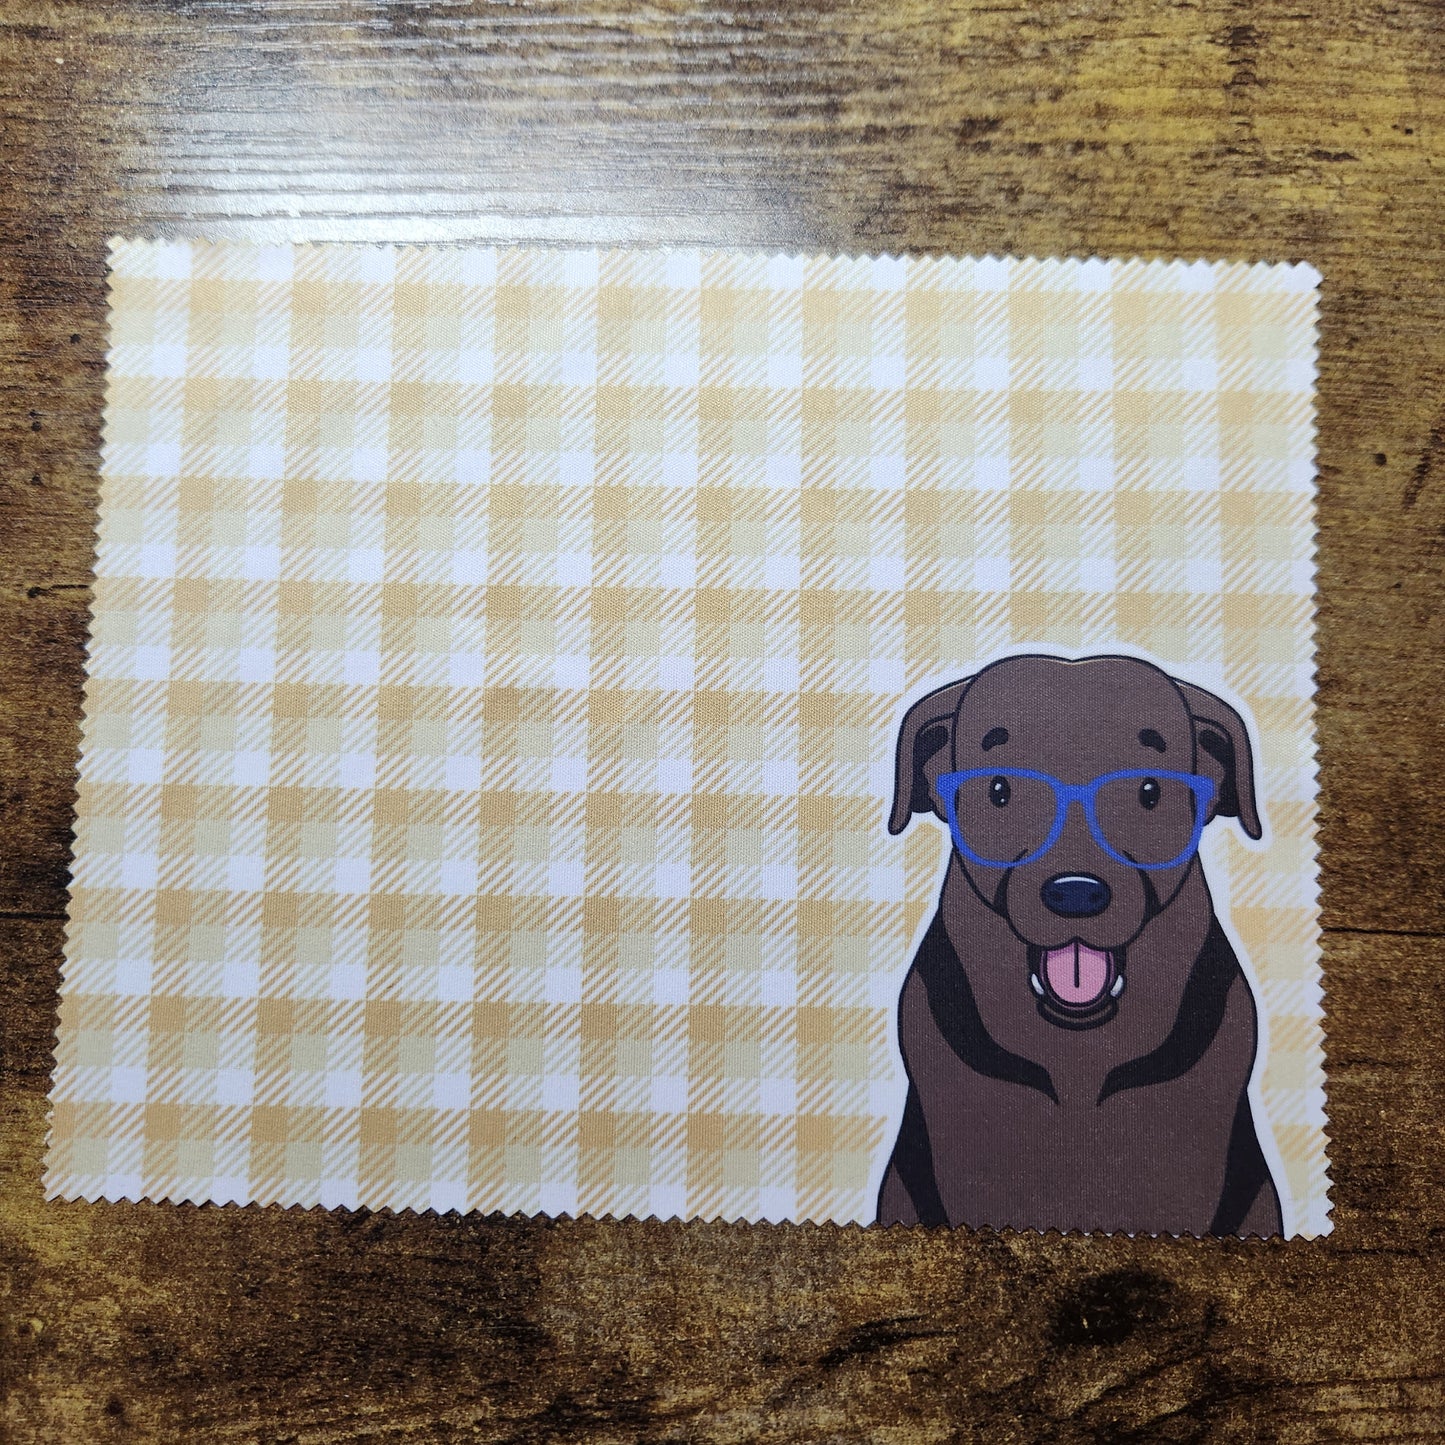 Chocolate Lab - Lens Cloth (Made to Order)